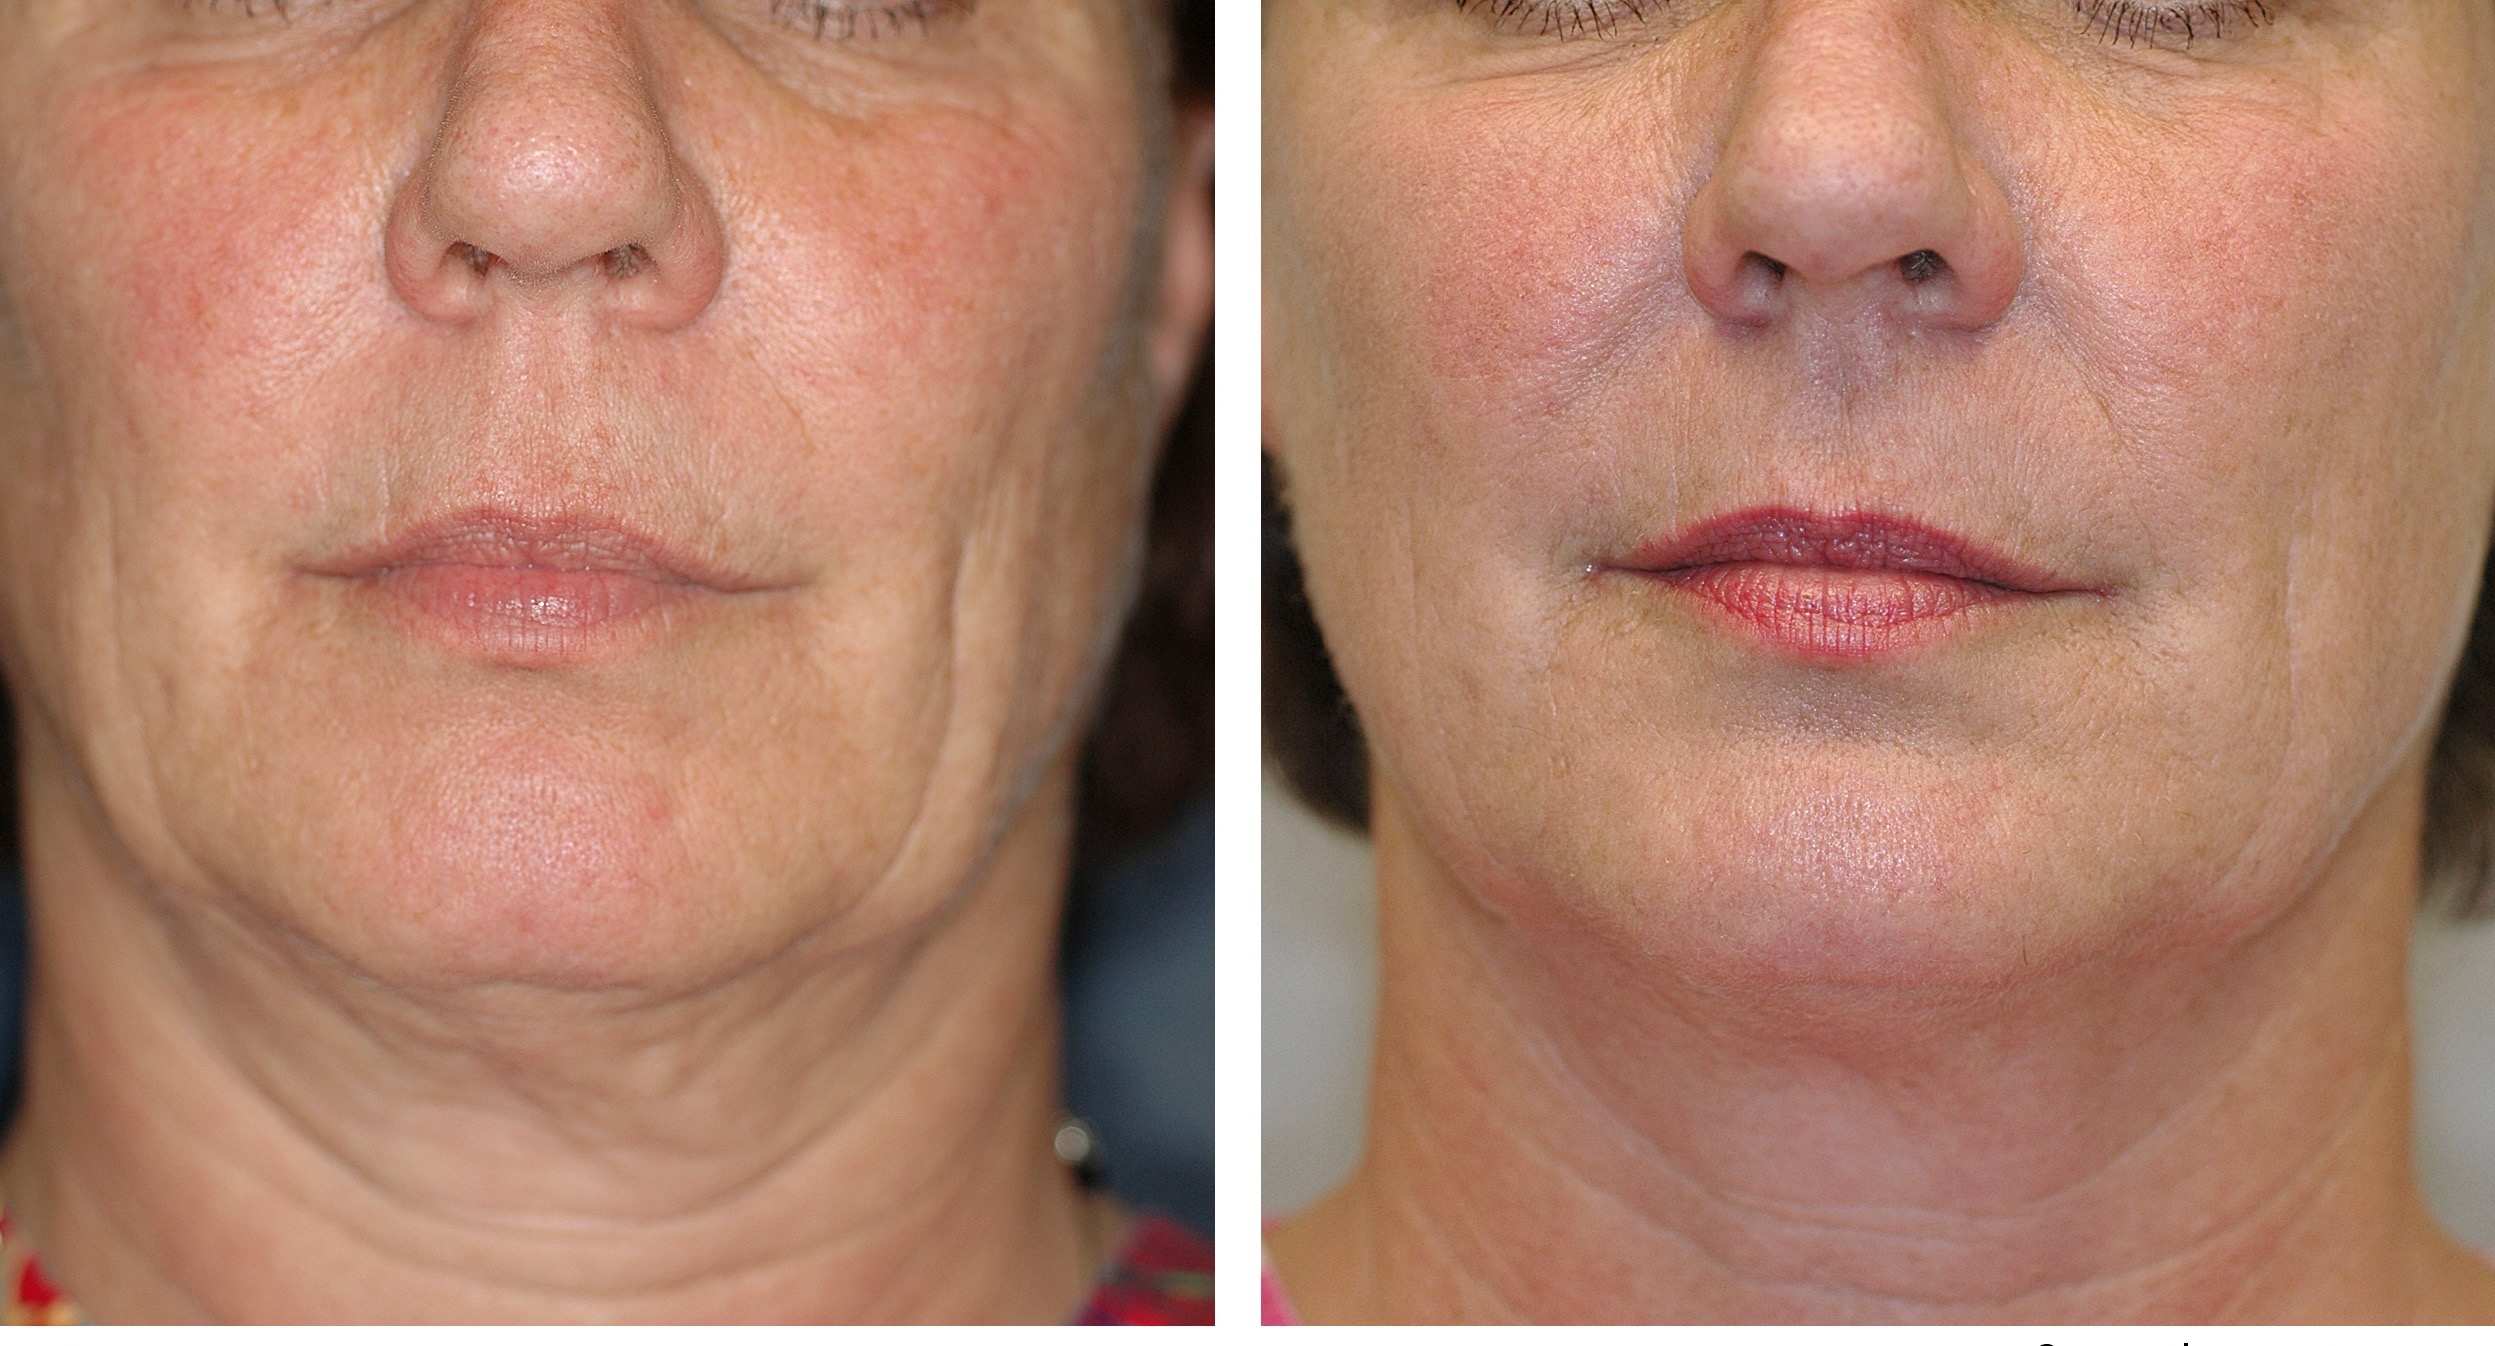 Thermage For Non Surgical Face Lifts And To Tighten Loose Skin Was The No Choice To Tighten